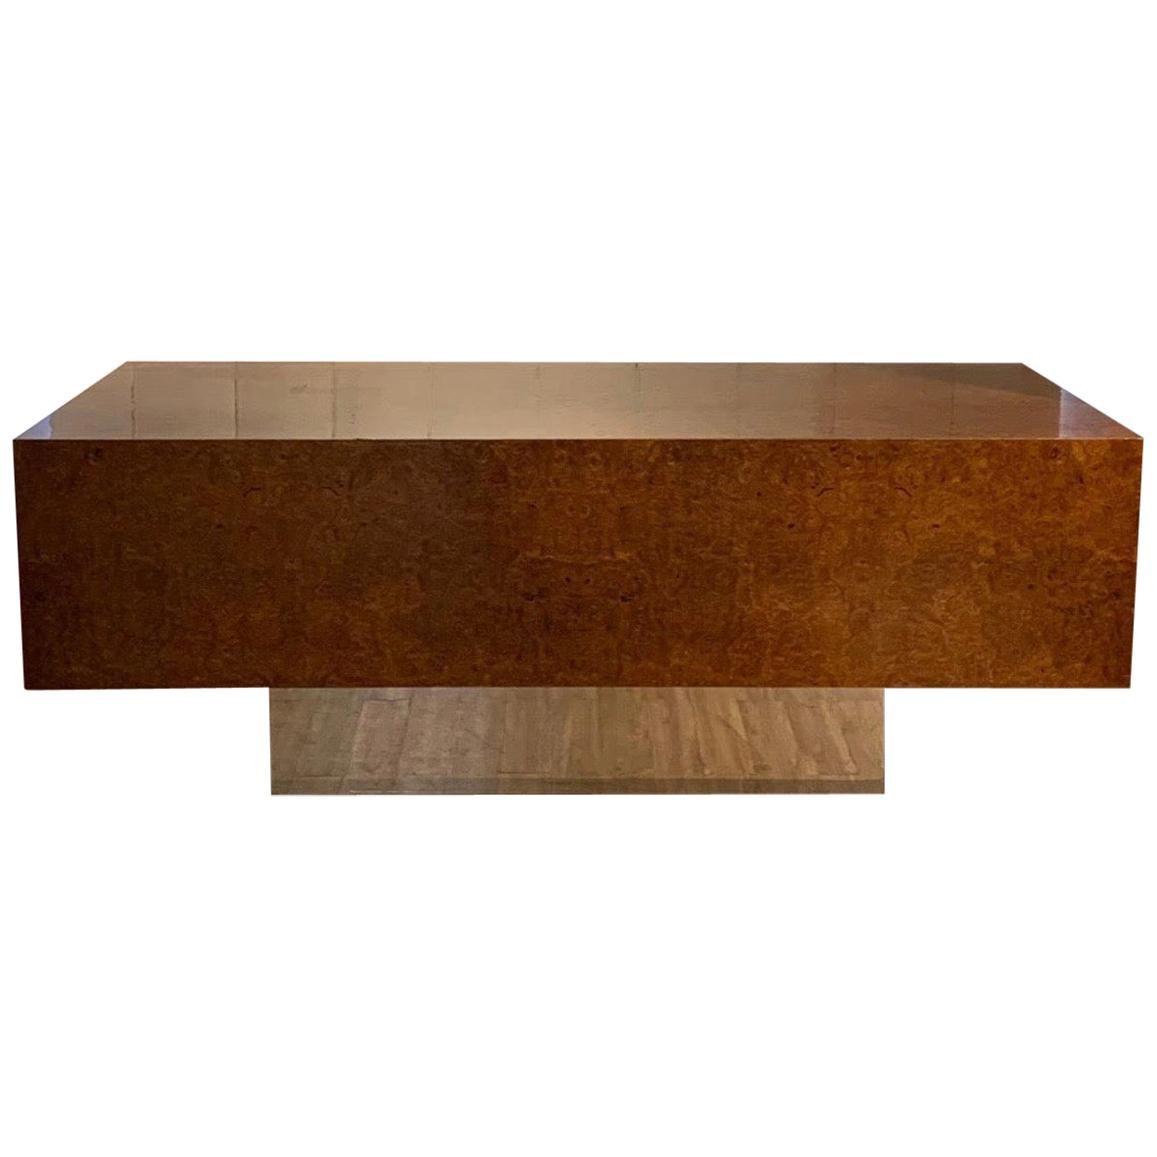 Burl Wood and Polished Steel Desk by Leon Rosen for Pace Collection, circa 1970